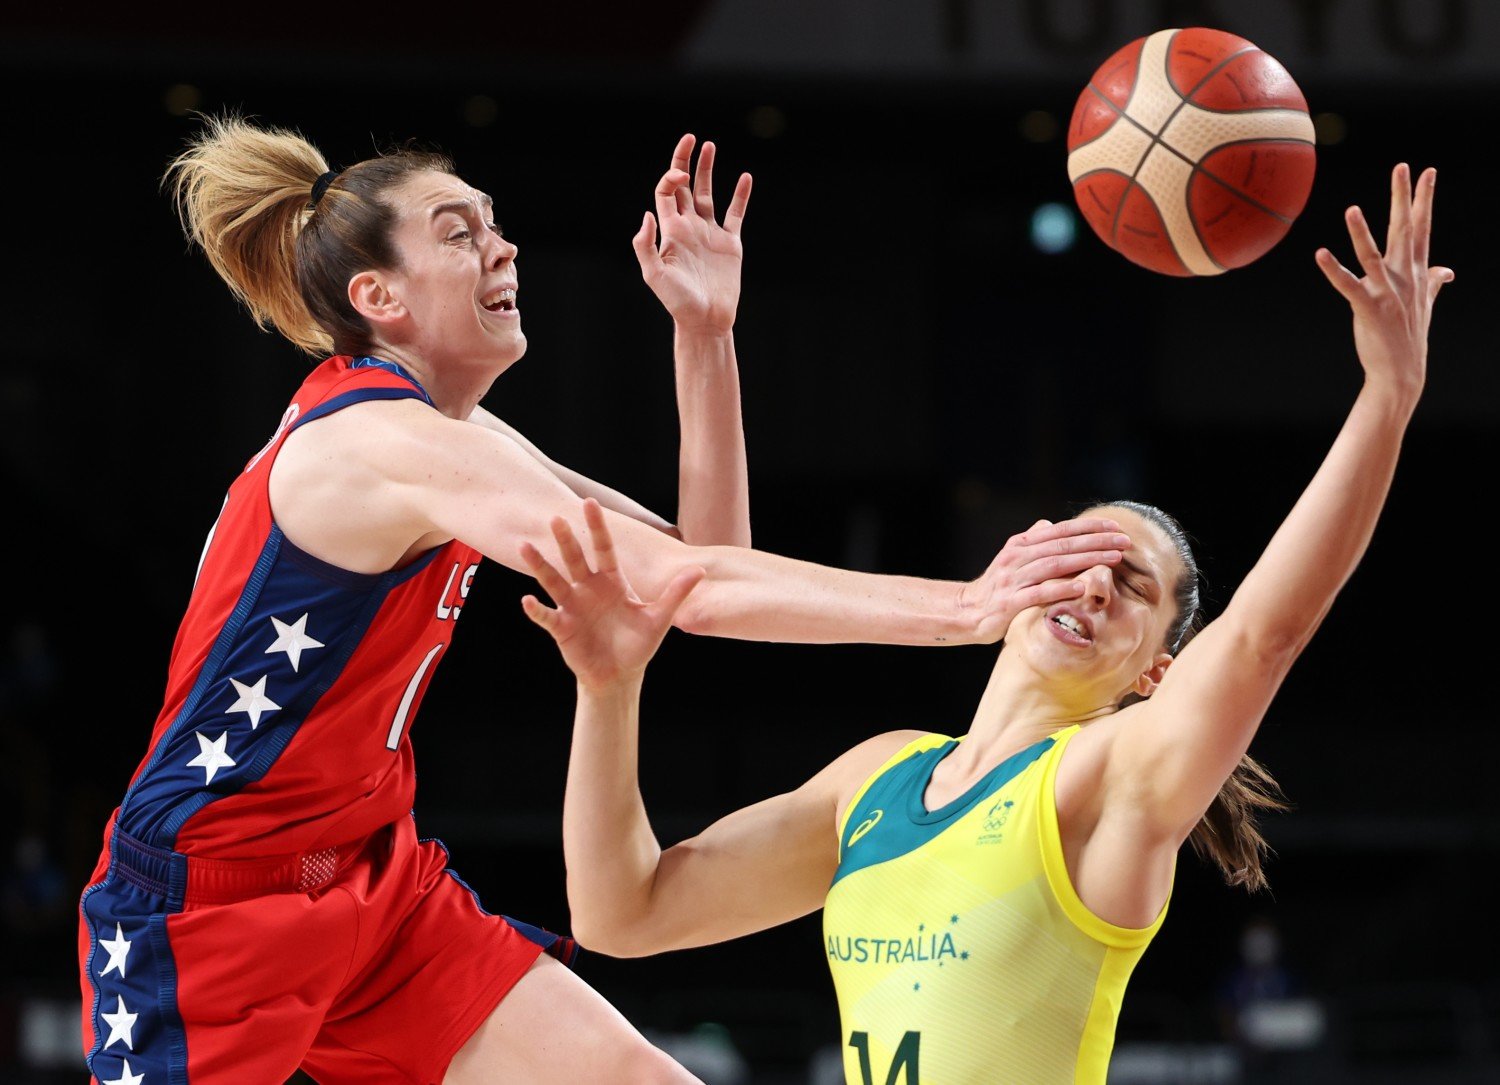 Australia's center Marianna Tolo is hit in the face by the United States forward Breanna Stewart as they chase a loose ball from in the first half of the Women's Basketball Quarterfinal at Saitama Super Arena on Wednesday, Aug. 4, 2021.